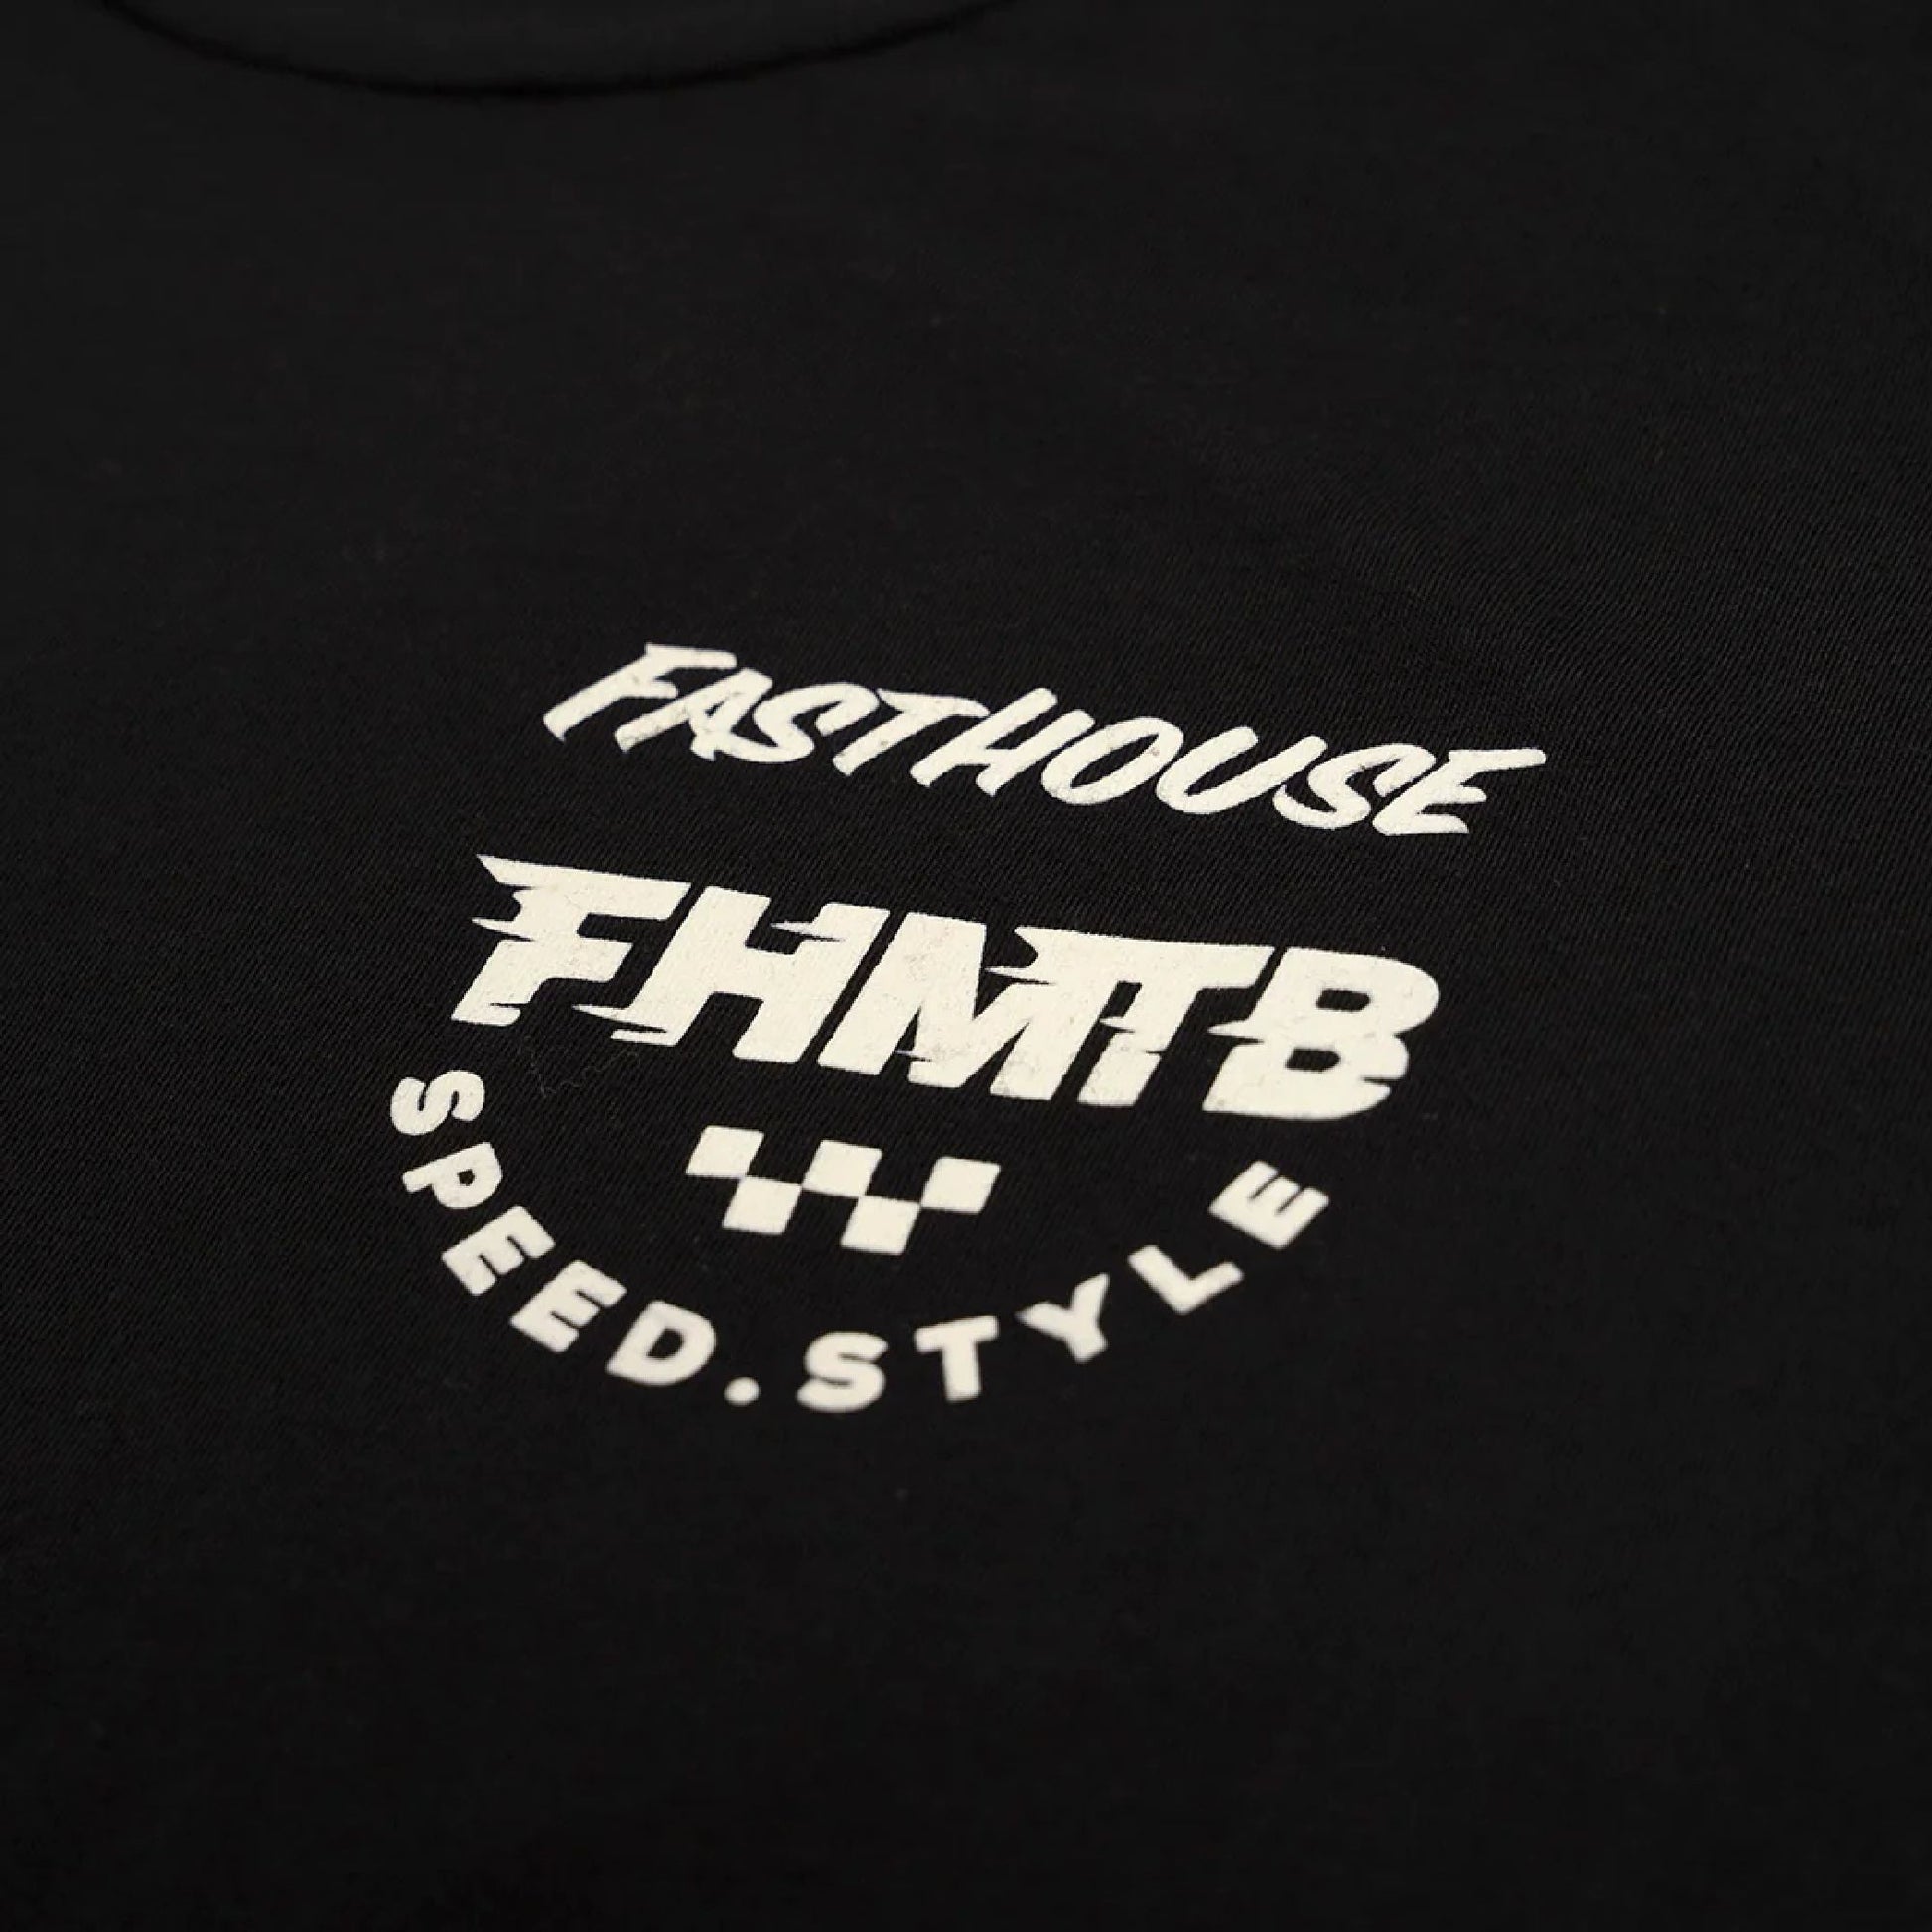 Fasthouse Hierarchy SS Tech Tee Black - Fasthouse SS Shirts